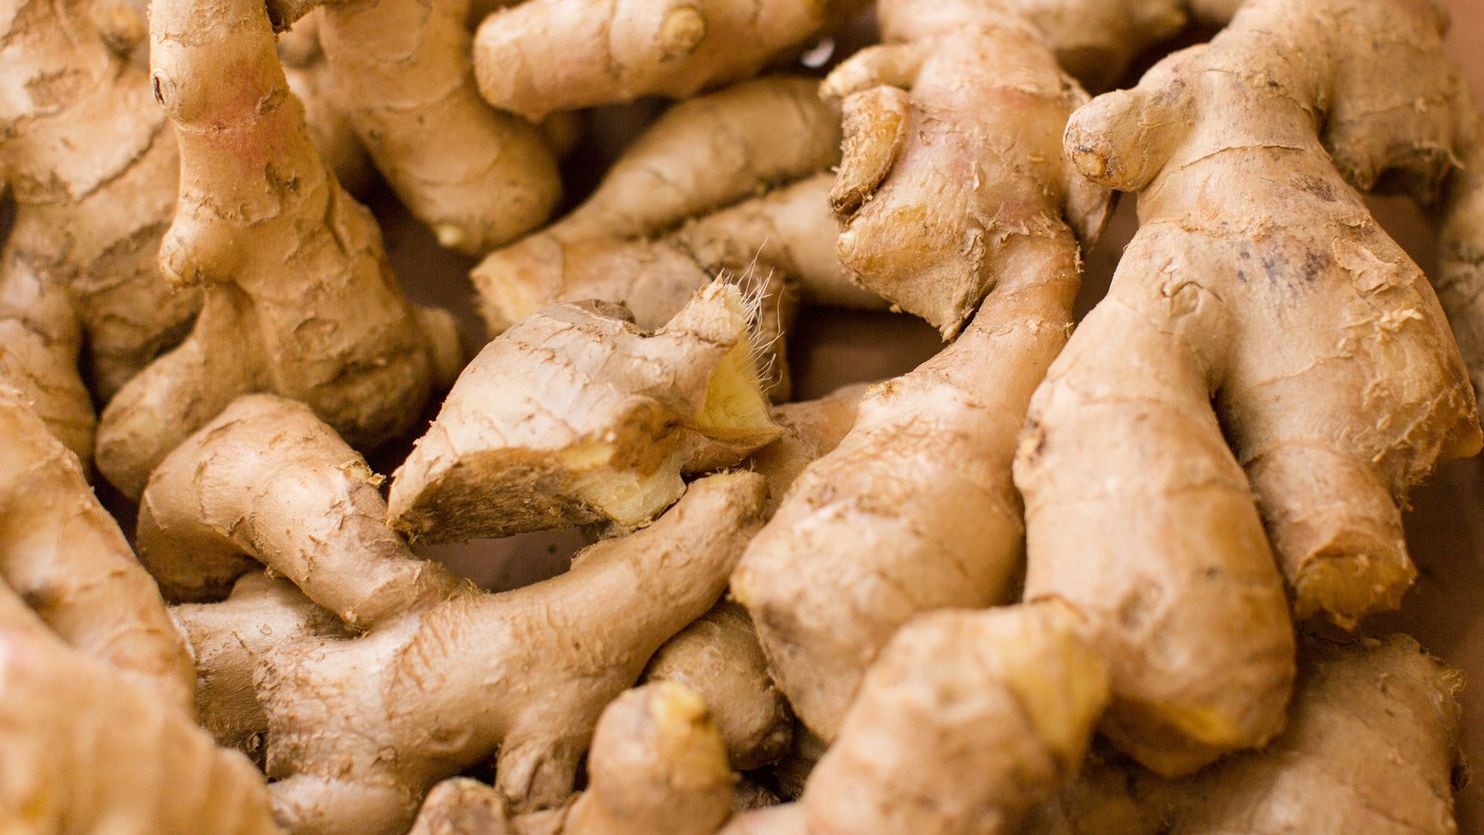 Natural Remedies Guide - Using Ginger for Cough